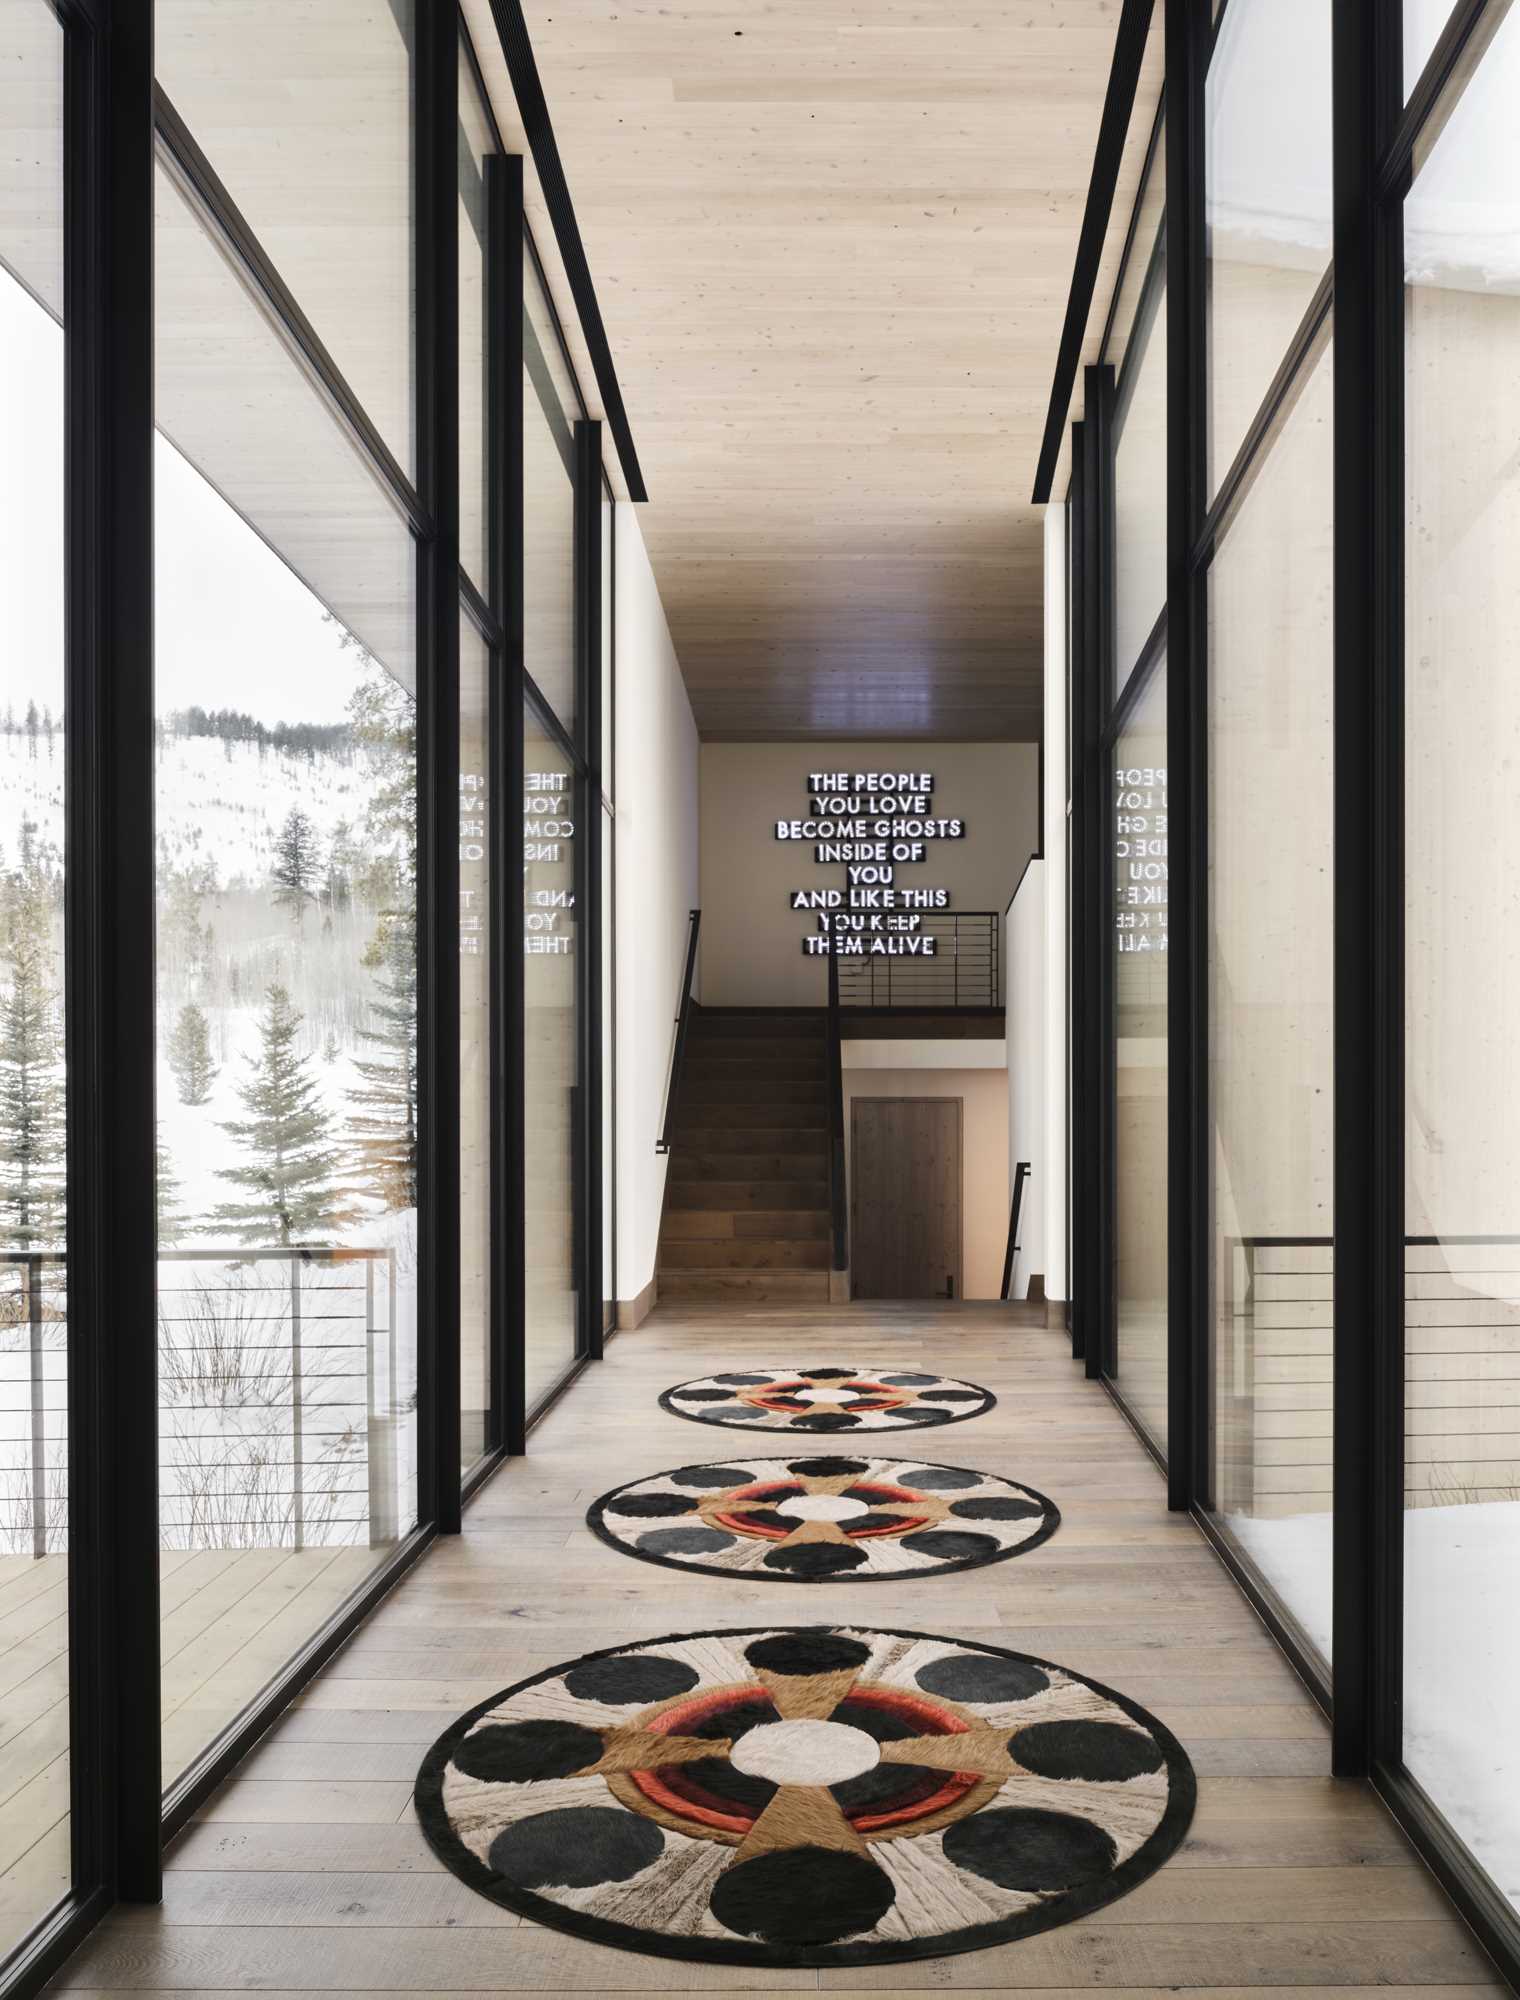 A double-height hallway with floor-to-ceiling windows with black frames s،wcase the surrounding views.